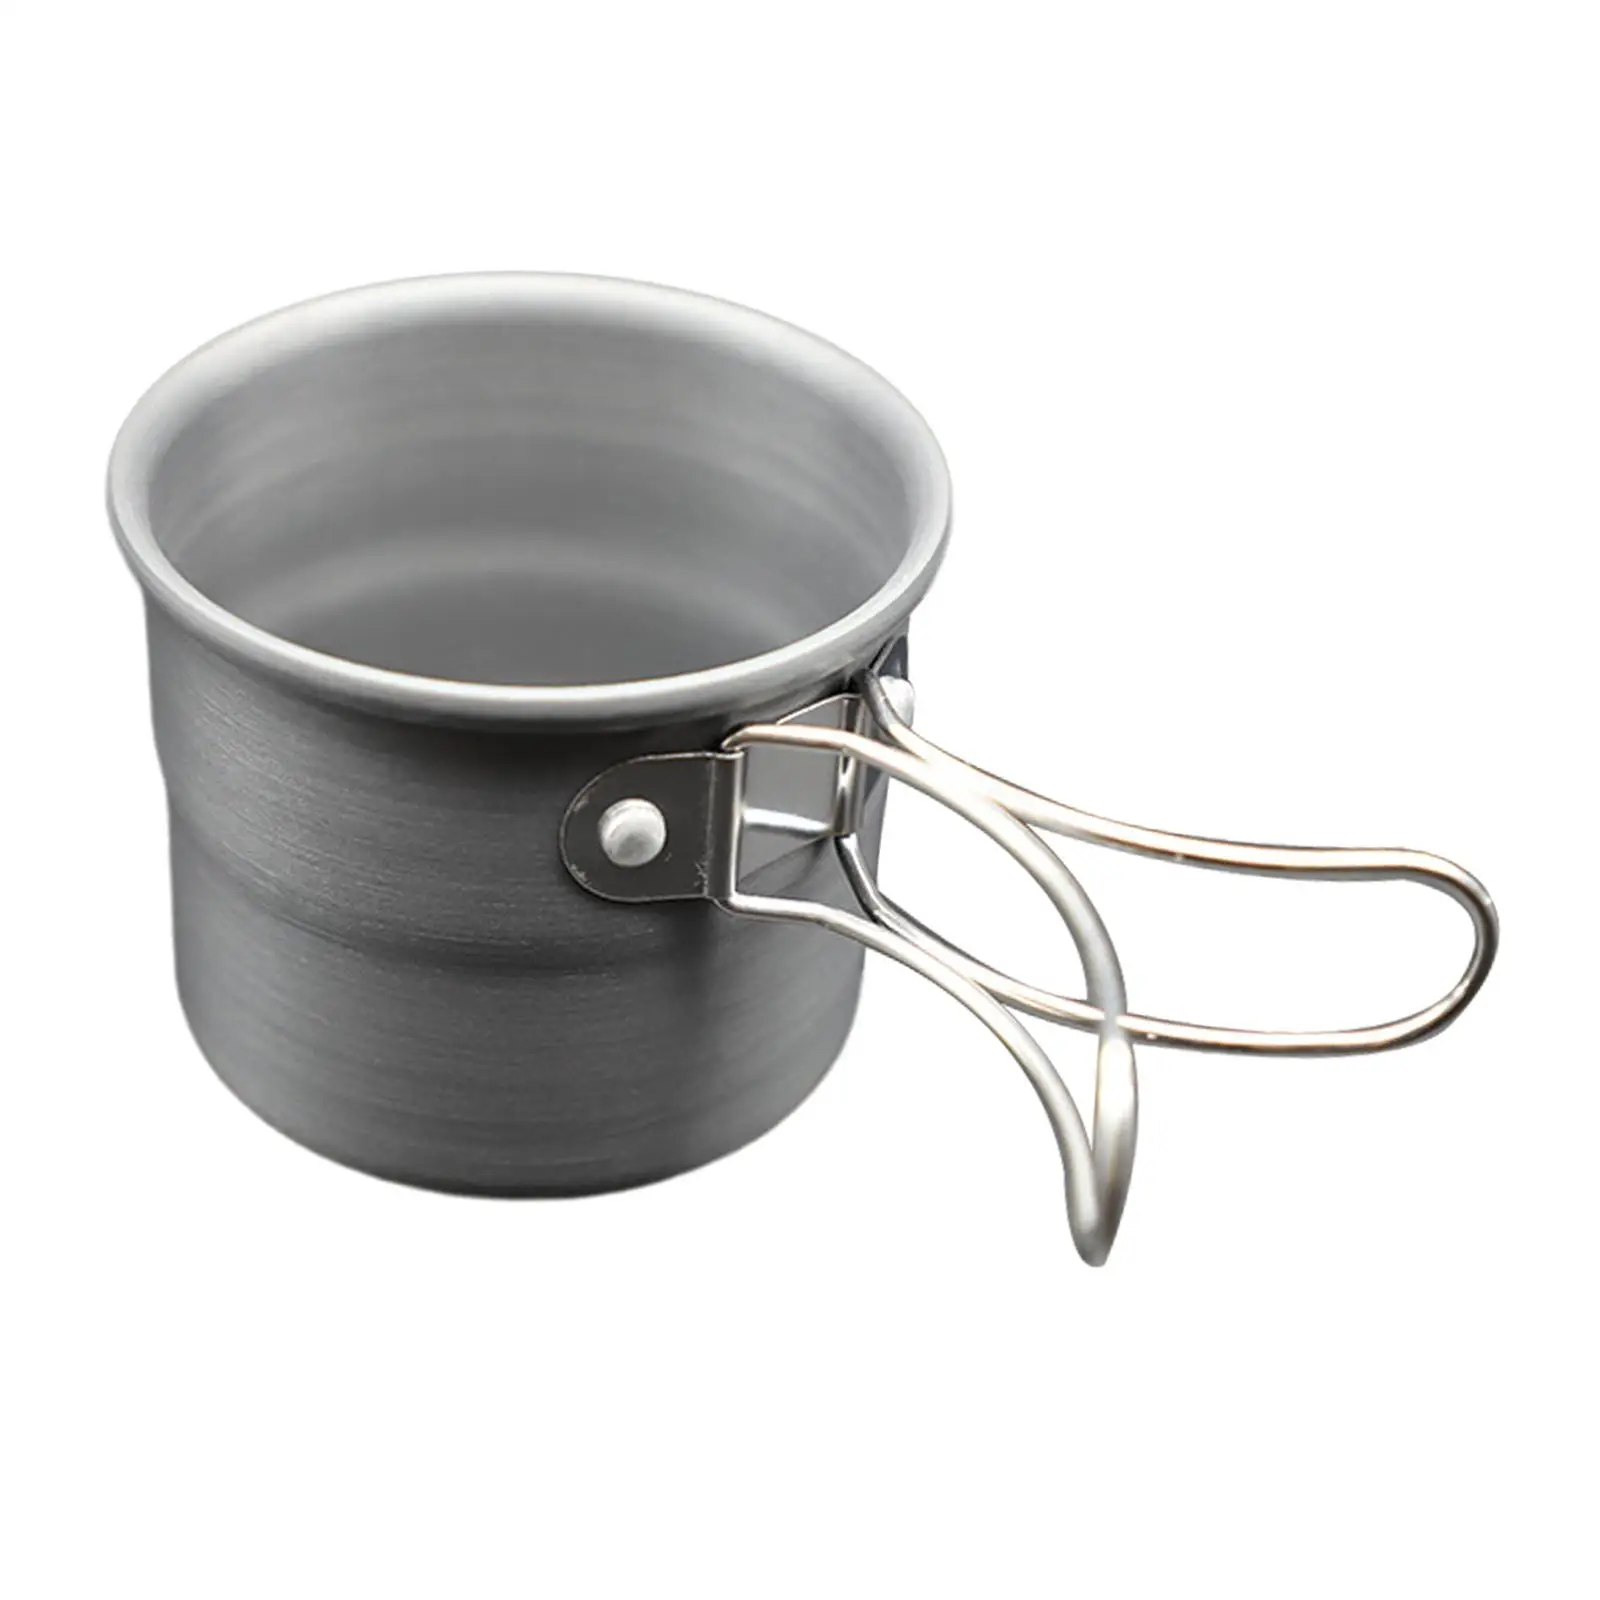 Camping Cup Mug Drinkware Aluminum Alloy Small with Foldable Handles Pot for Touring Trips Hiking Cooking Outdoor Backpacking